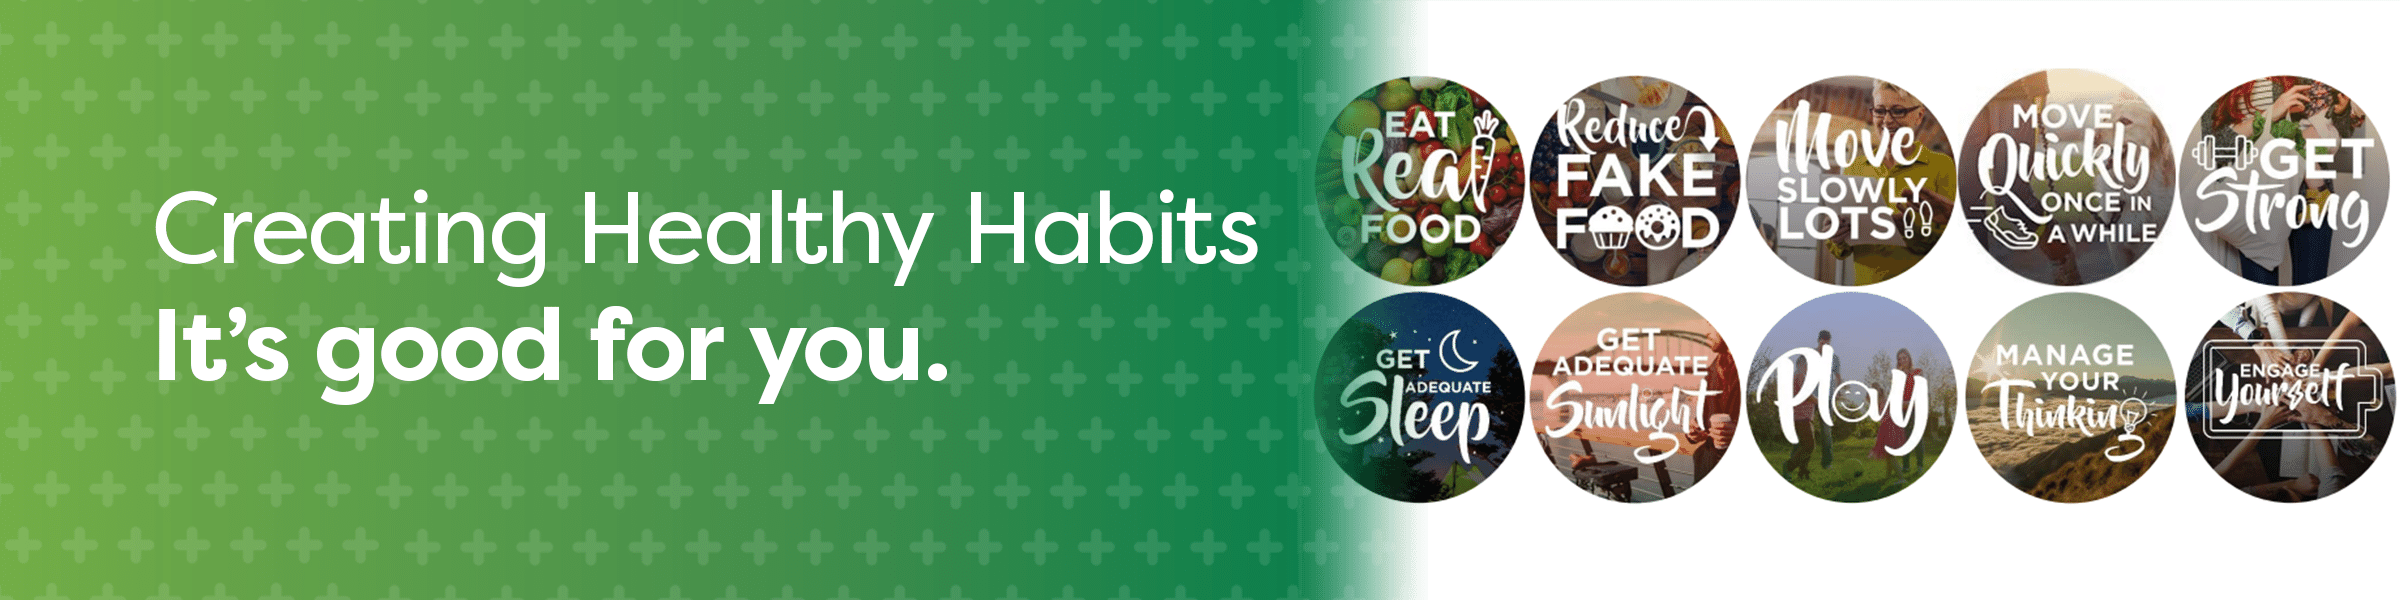 top tips to Creating Healthy Habits